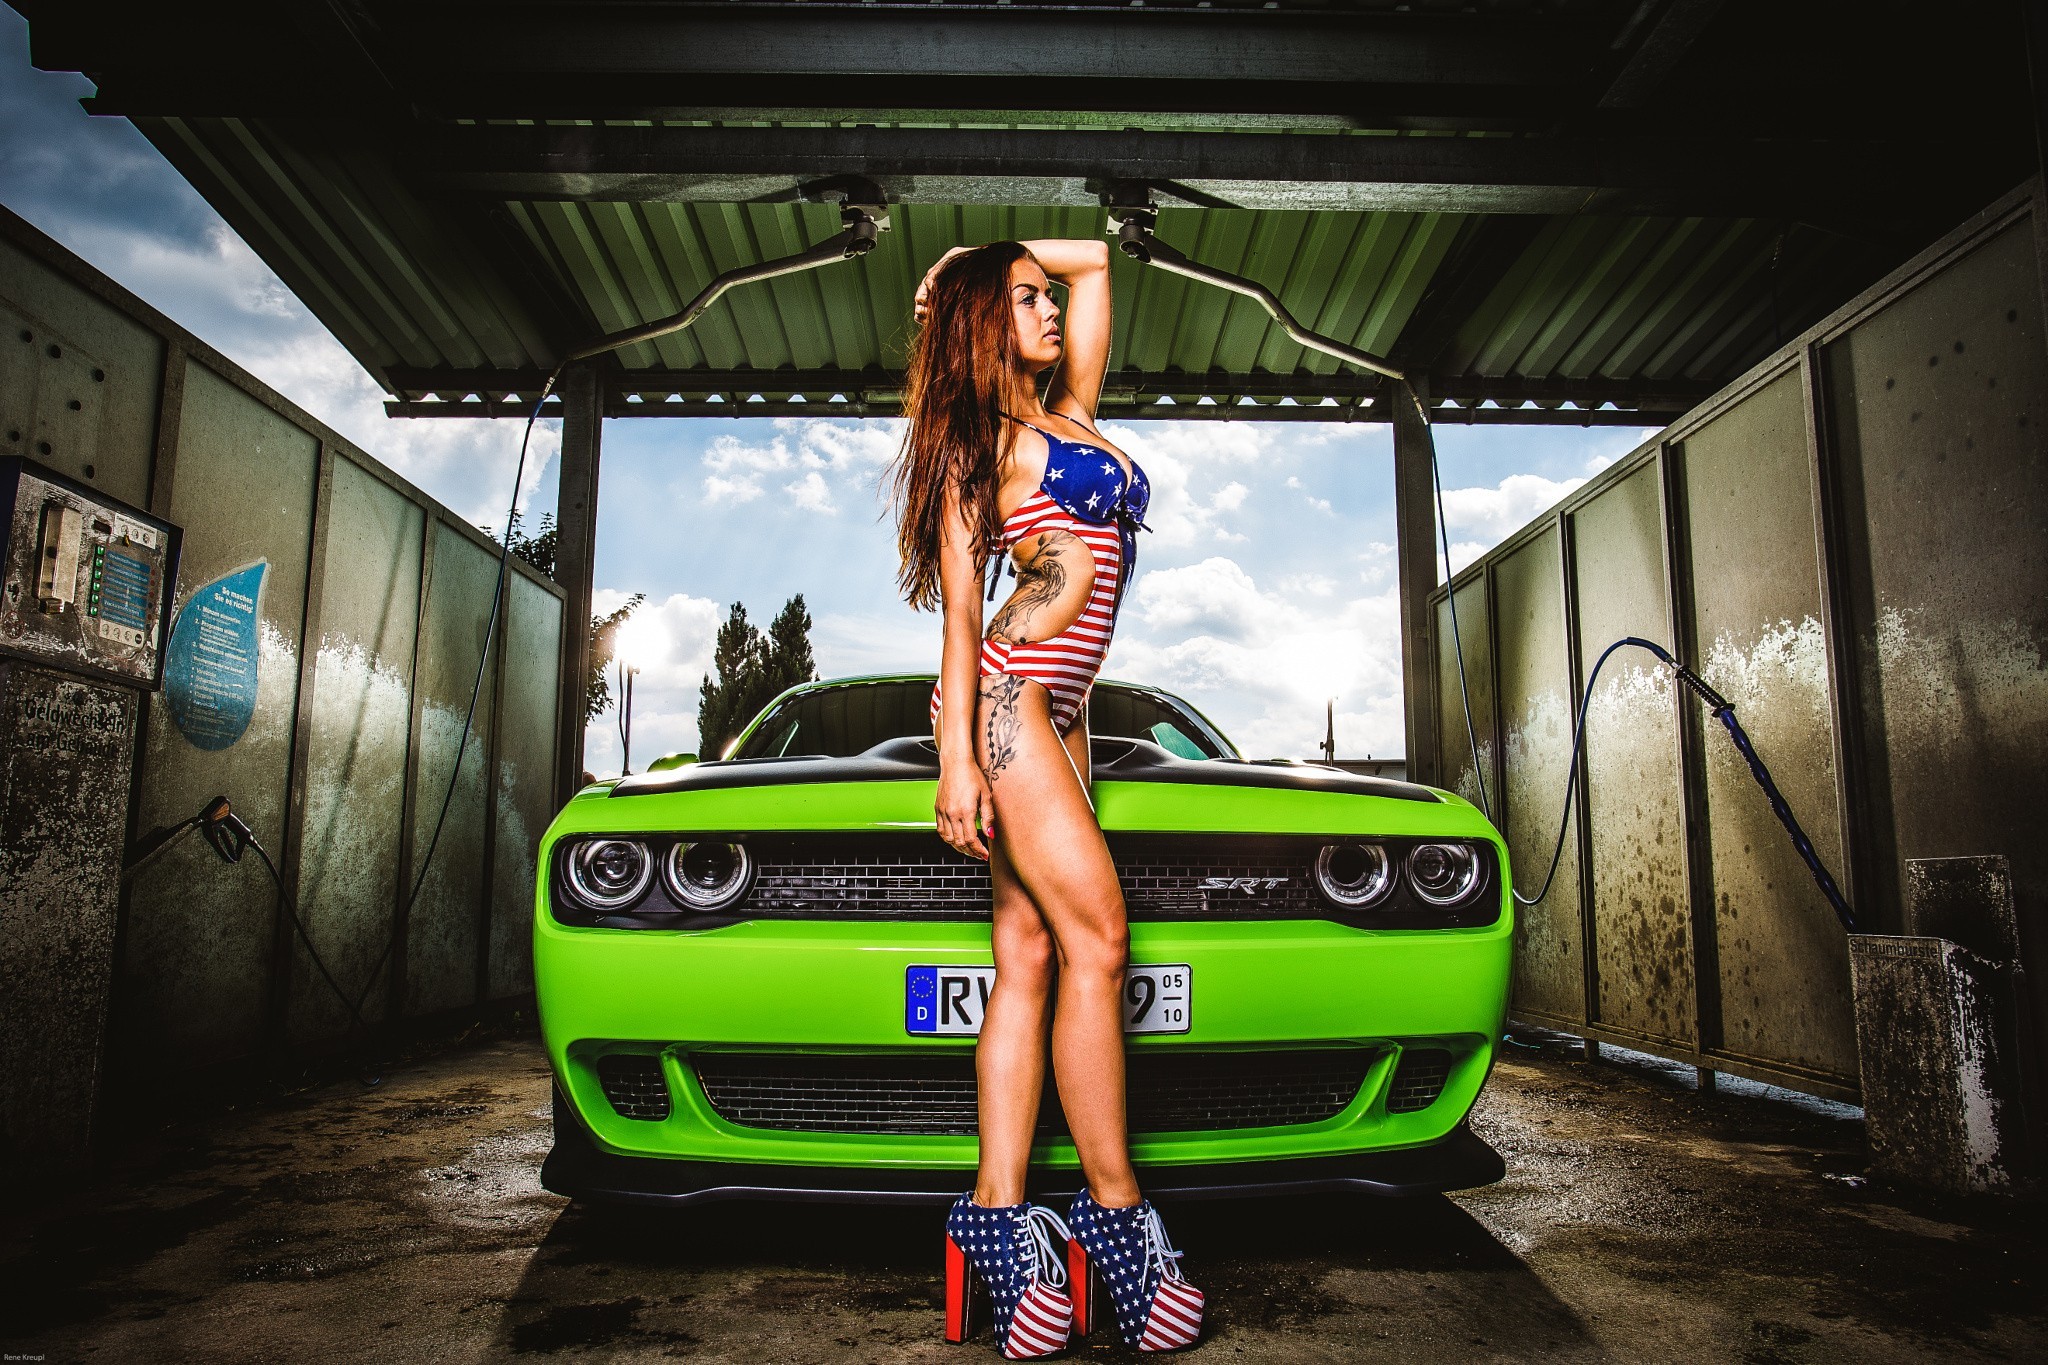 Image: Girl, swimsuit, tattoo, shoes, car wash, car, America, green